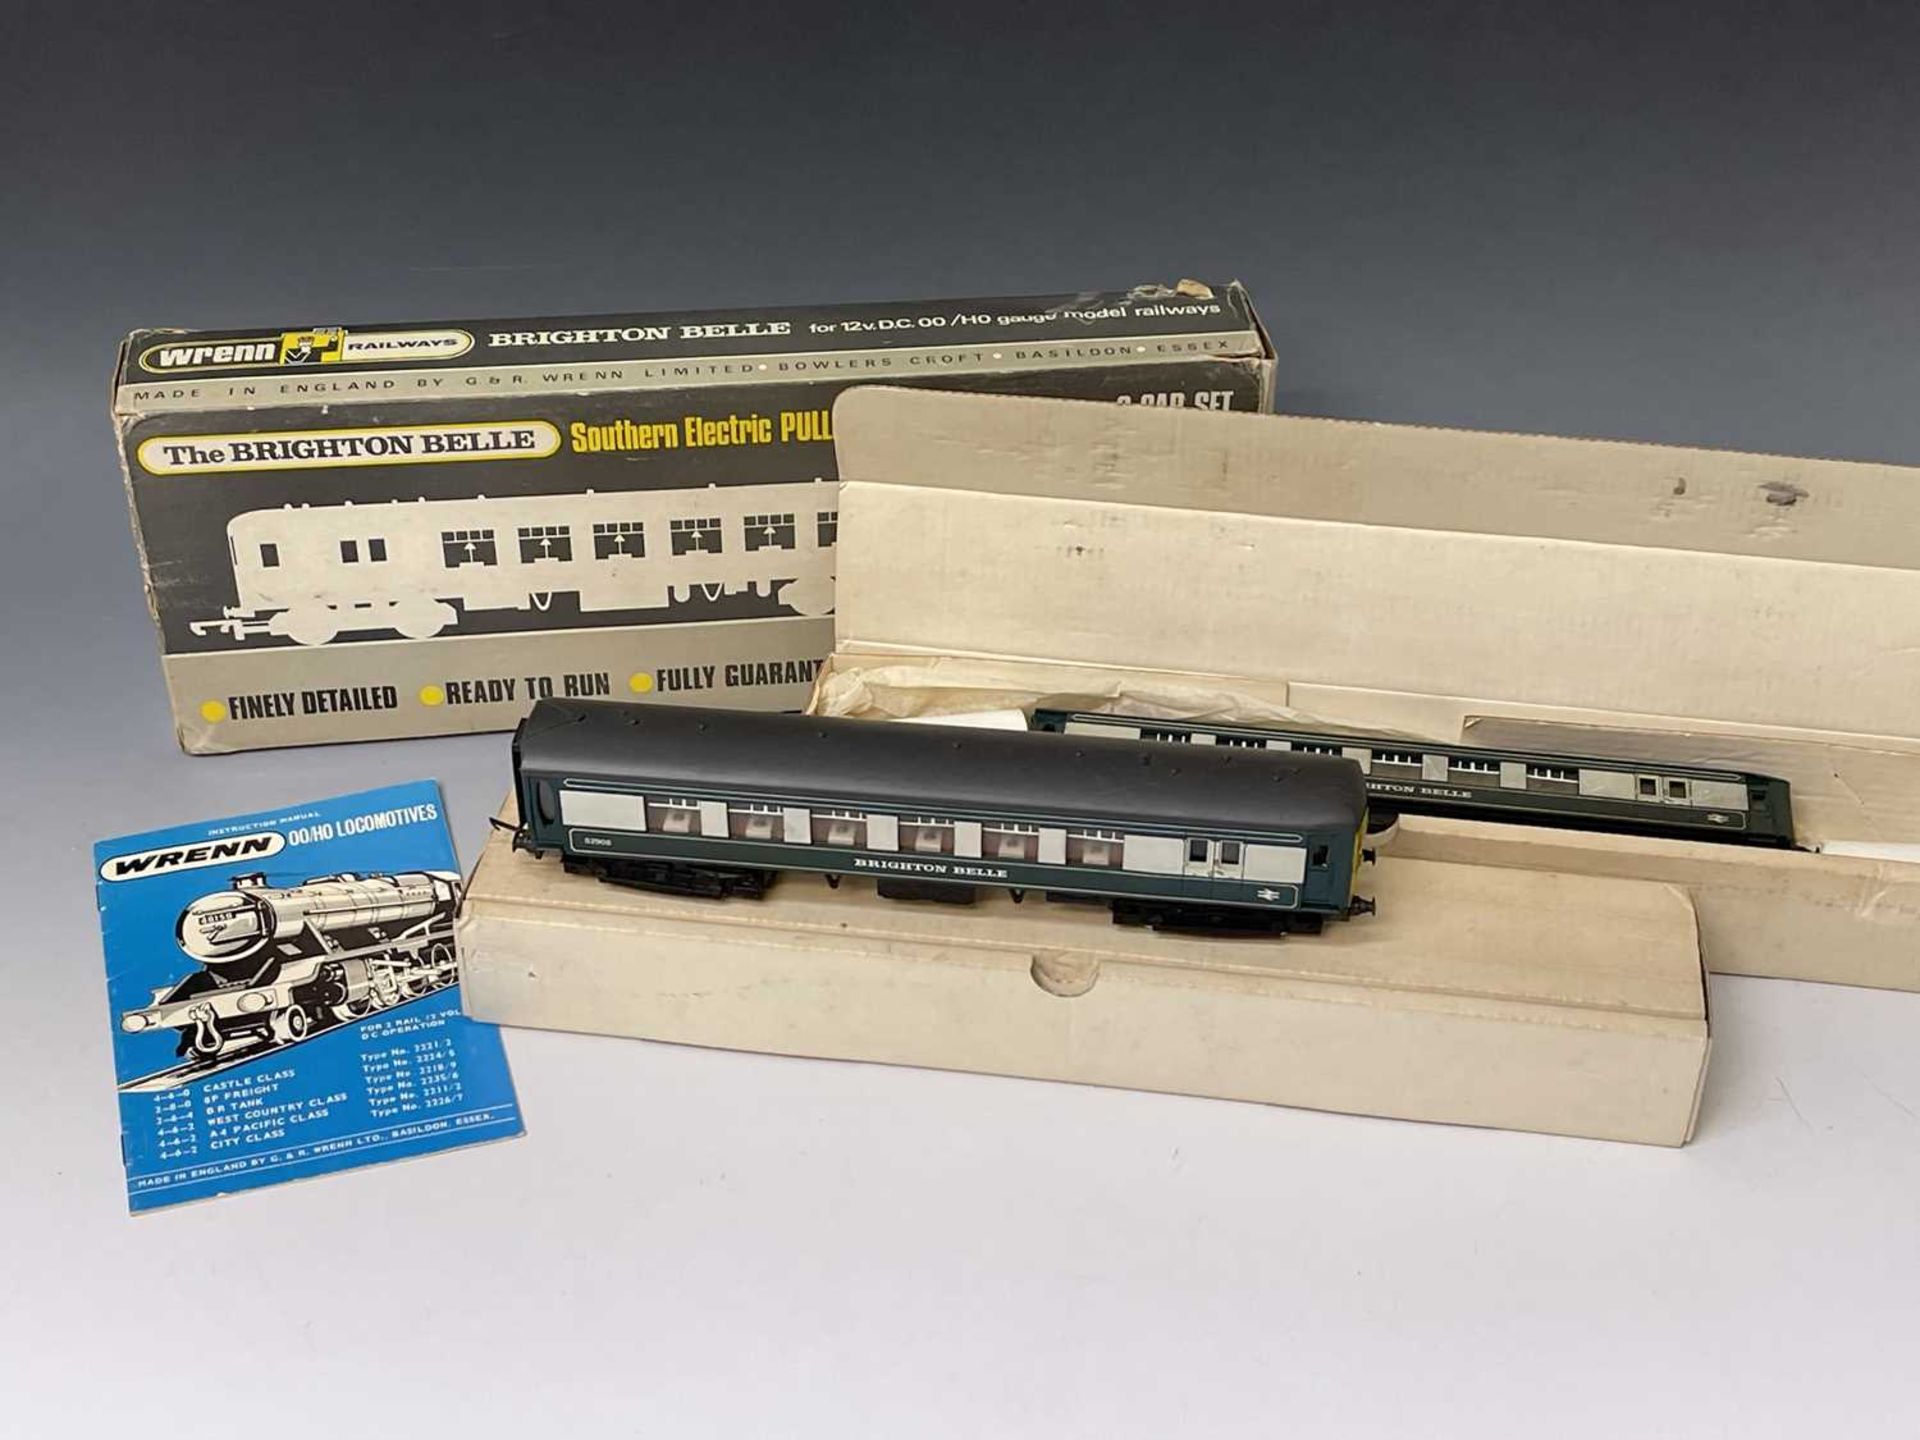 Wrenn 00 Gauge Model Railways. Comprising Final livery (BR blue and grey) 2 car Southern Electric " - Image 2 of 4